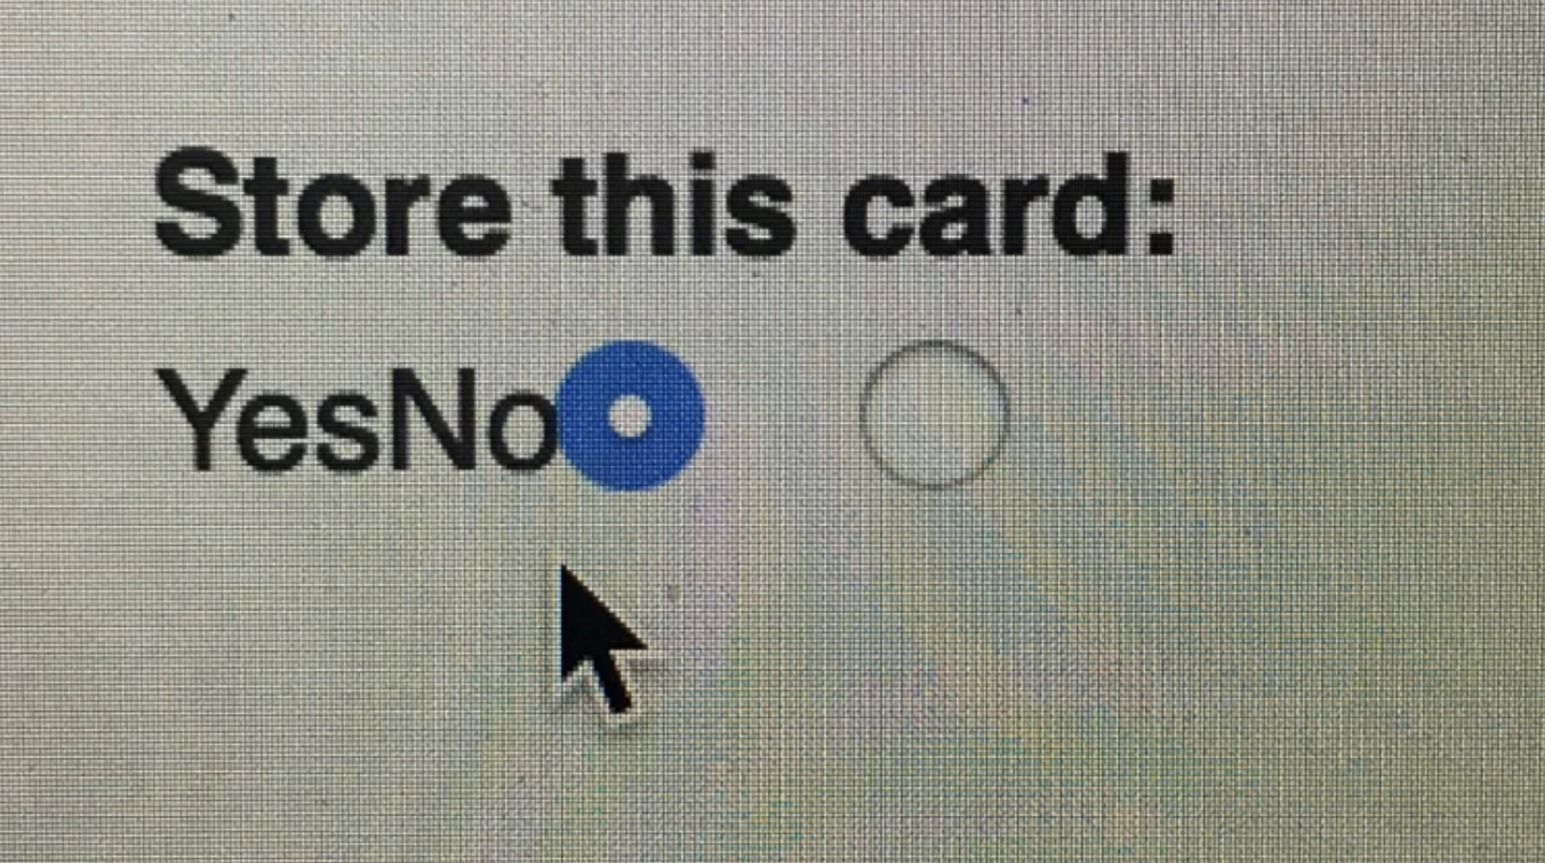 labels not aligned with radio buttons, making it unclear which option is for what